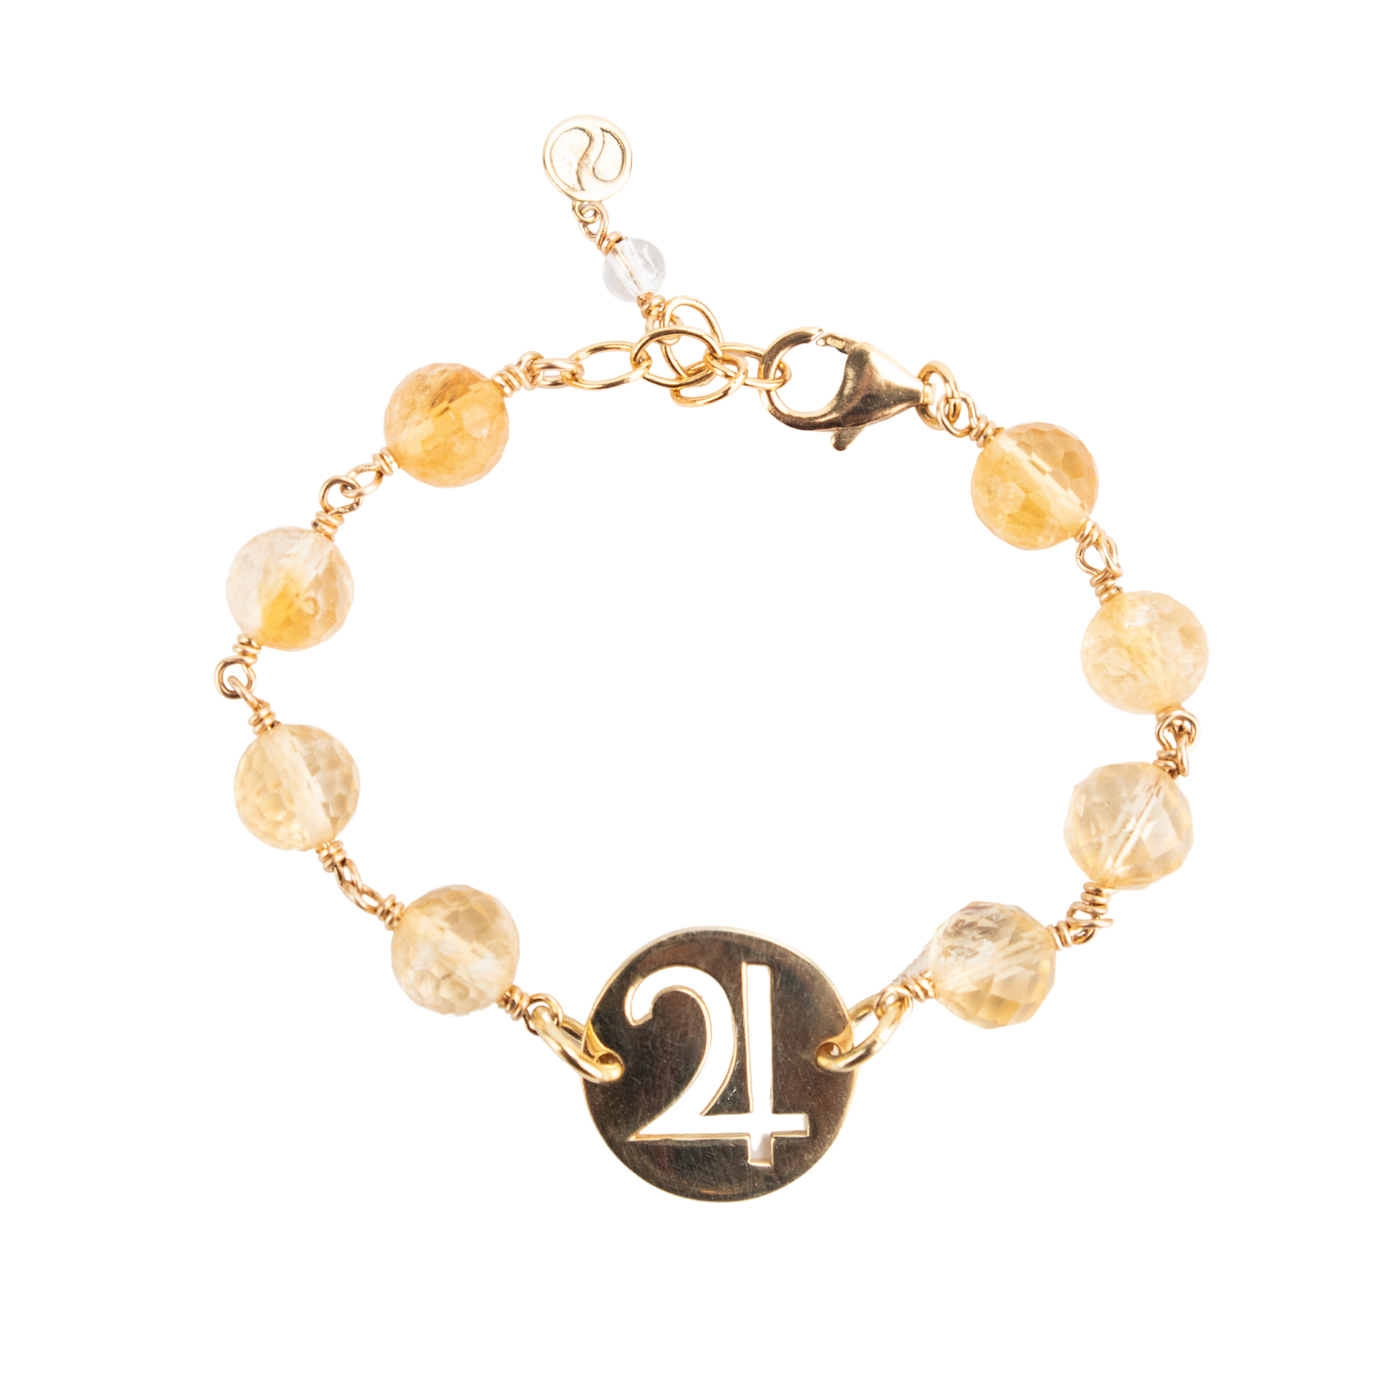 sterling silver and citrine crystal bracelet with cutout pendant and Jupiter symbol by Energy Muse